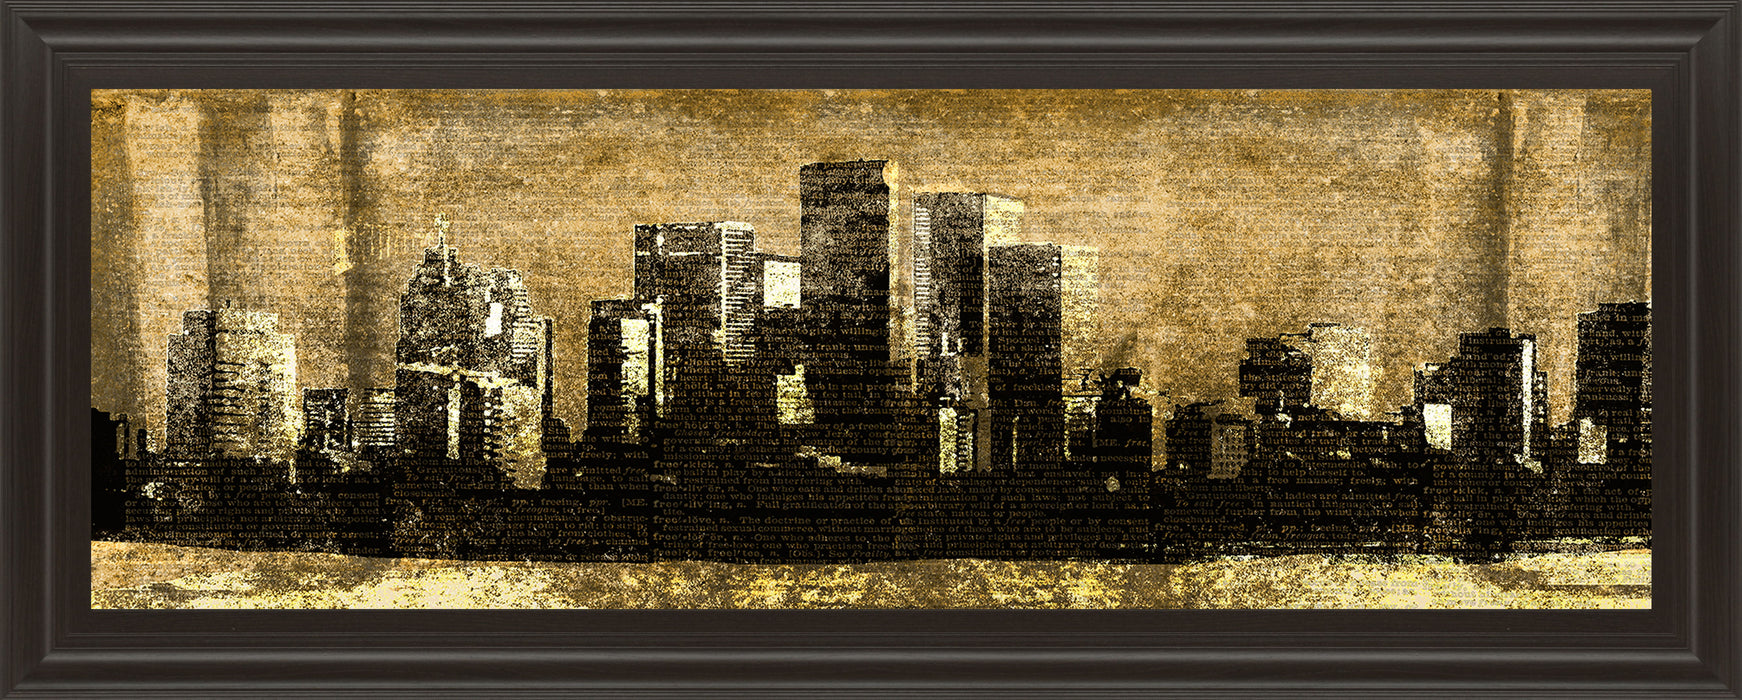 Defined City Il By Sd Graphic Studio - Framed Print Wall Art - Black